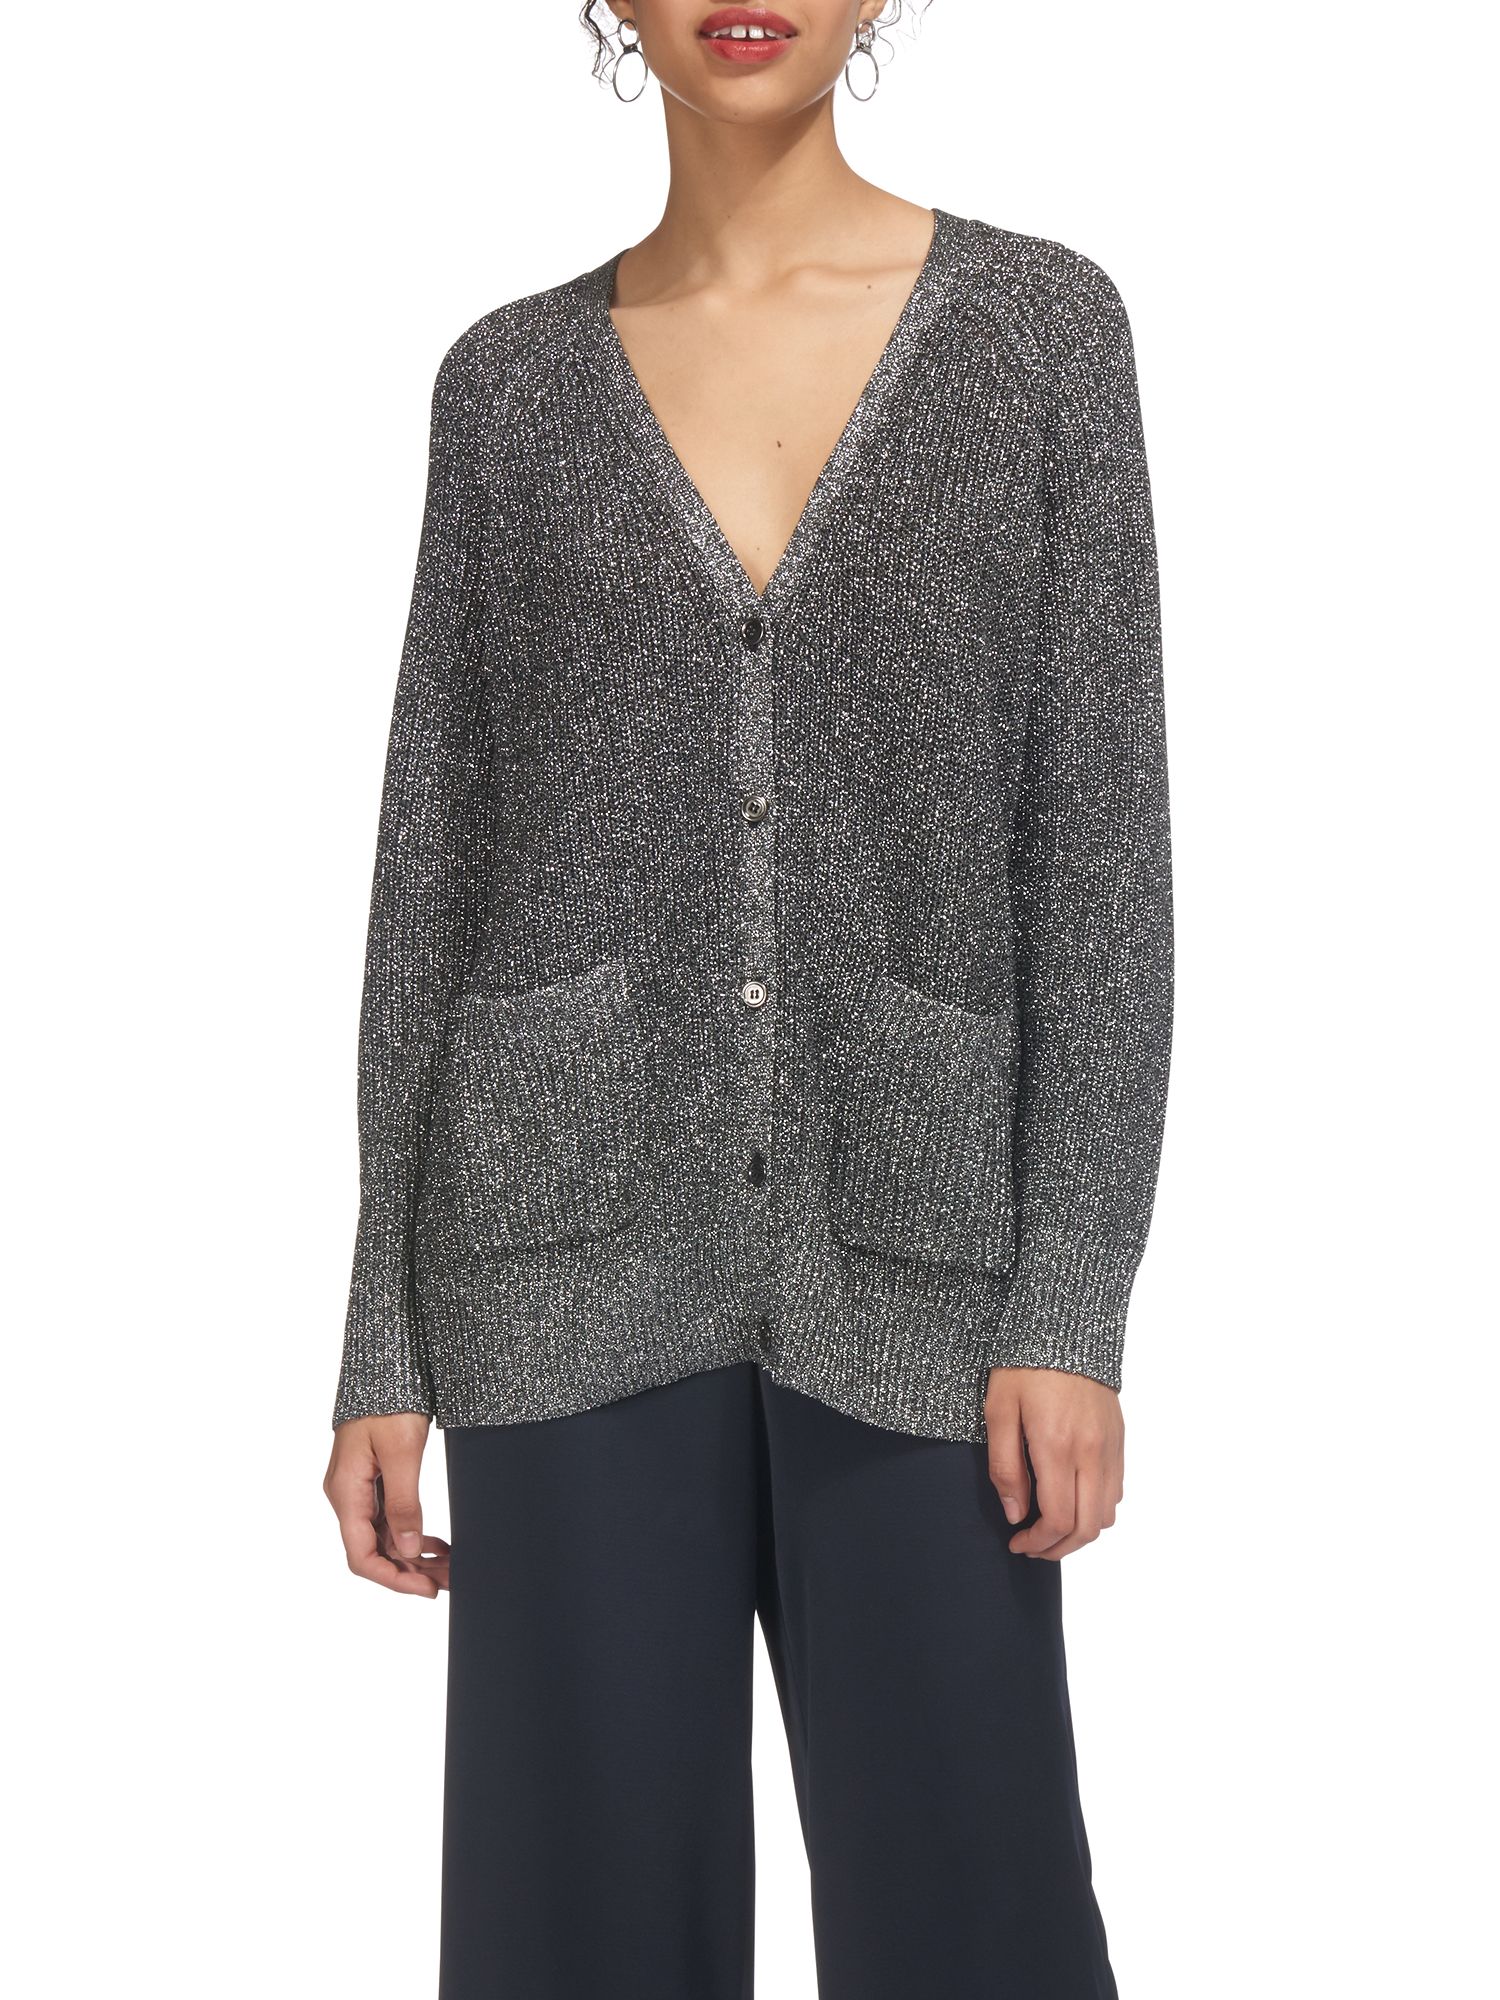 Whistles Sparkle Knit Cardigan, Silver